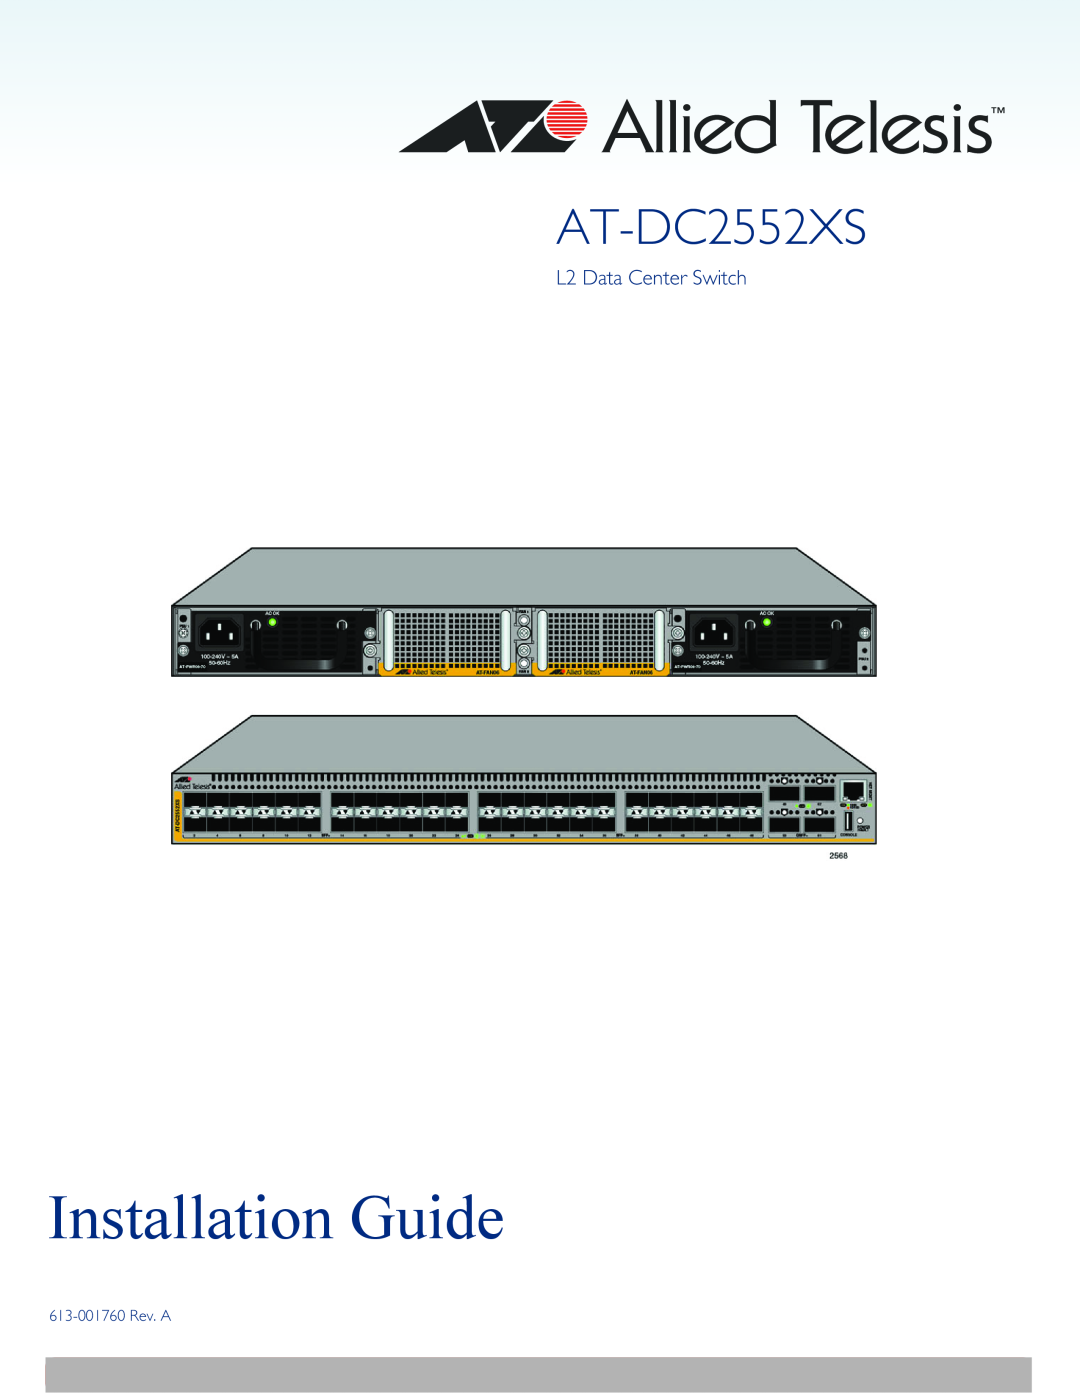 Allied Telesis AT-DC2552XS, AT-PWR06, AT-FAN06 manual Installation Guide, L2 Data Center Switch, 613-001760 Rev. A 